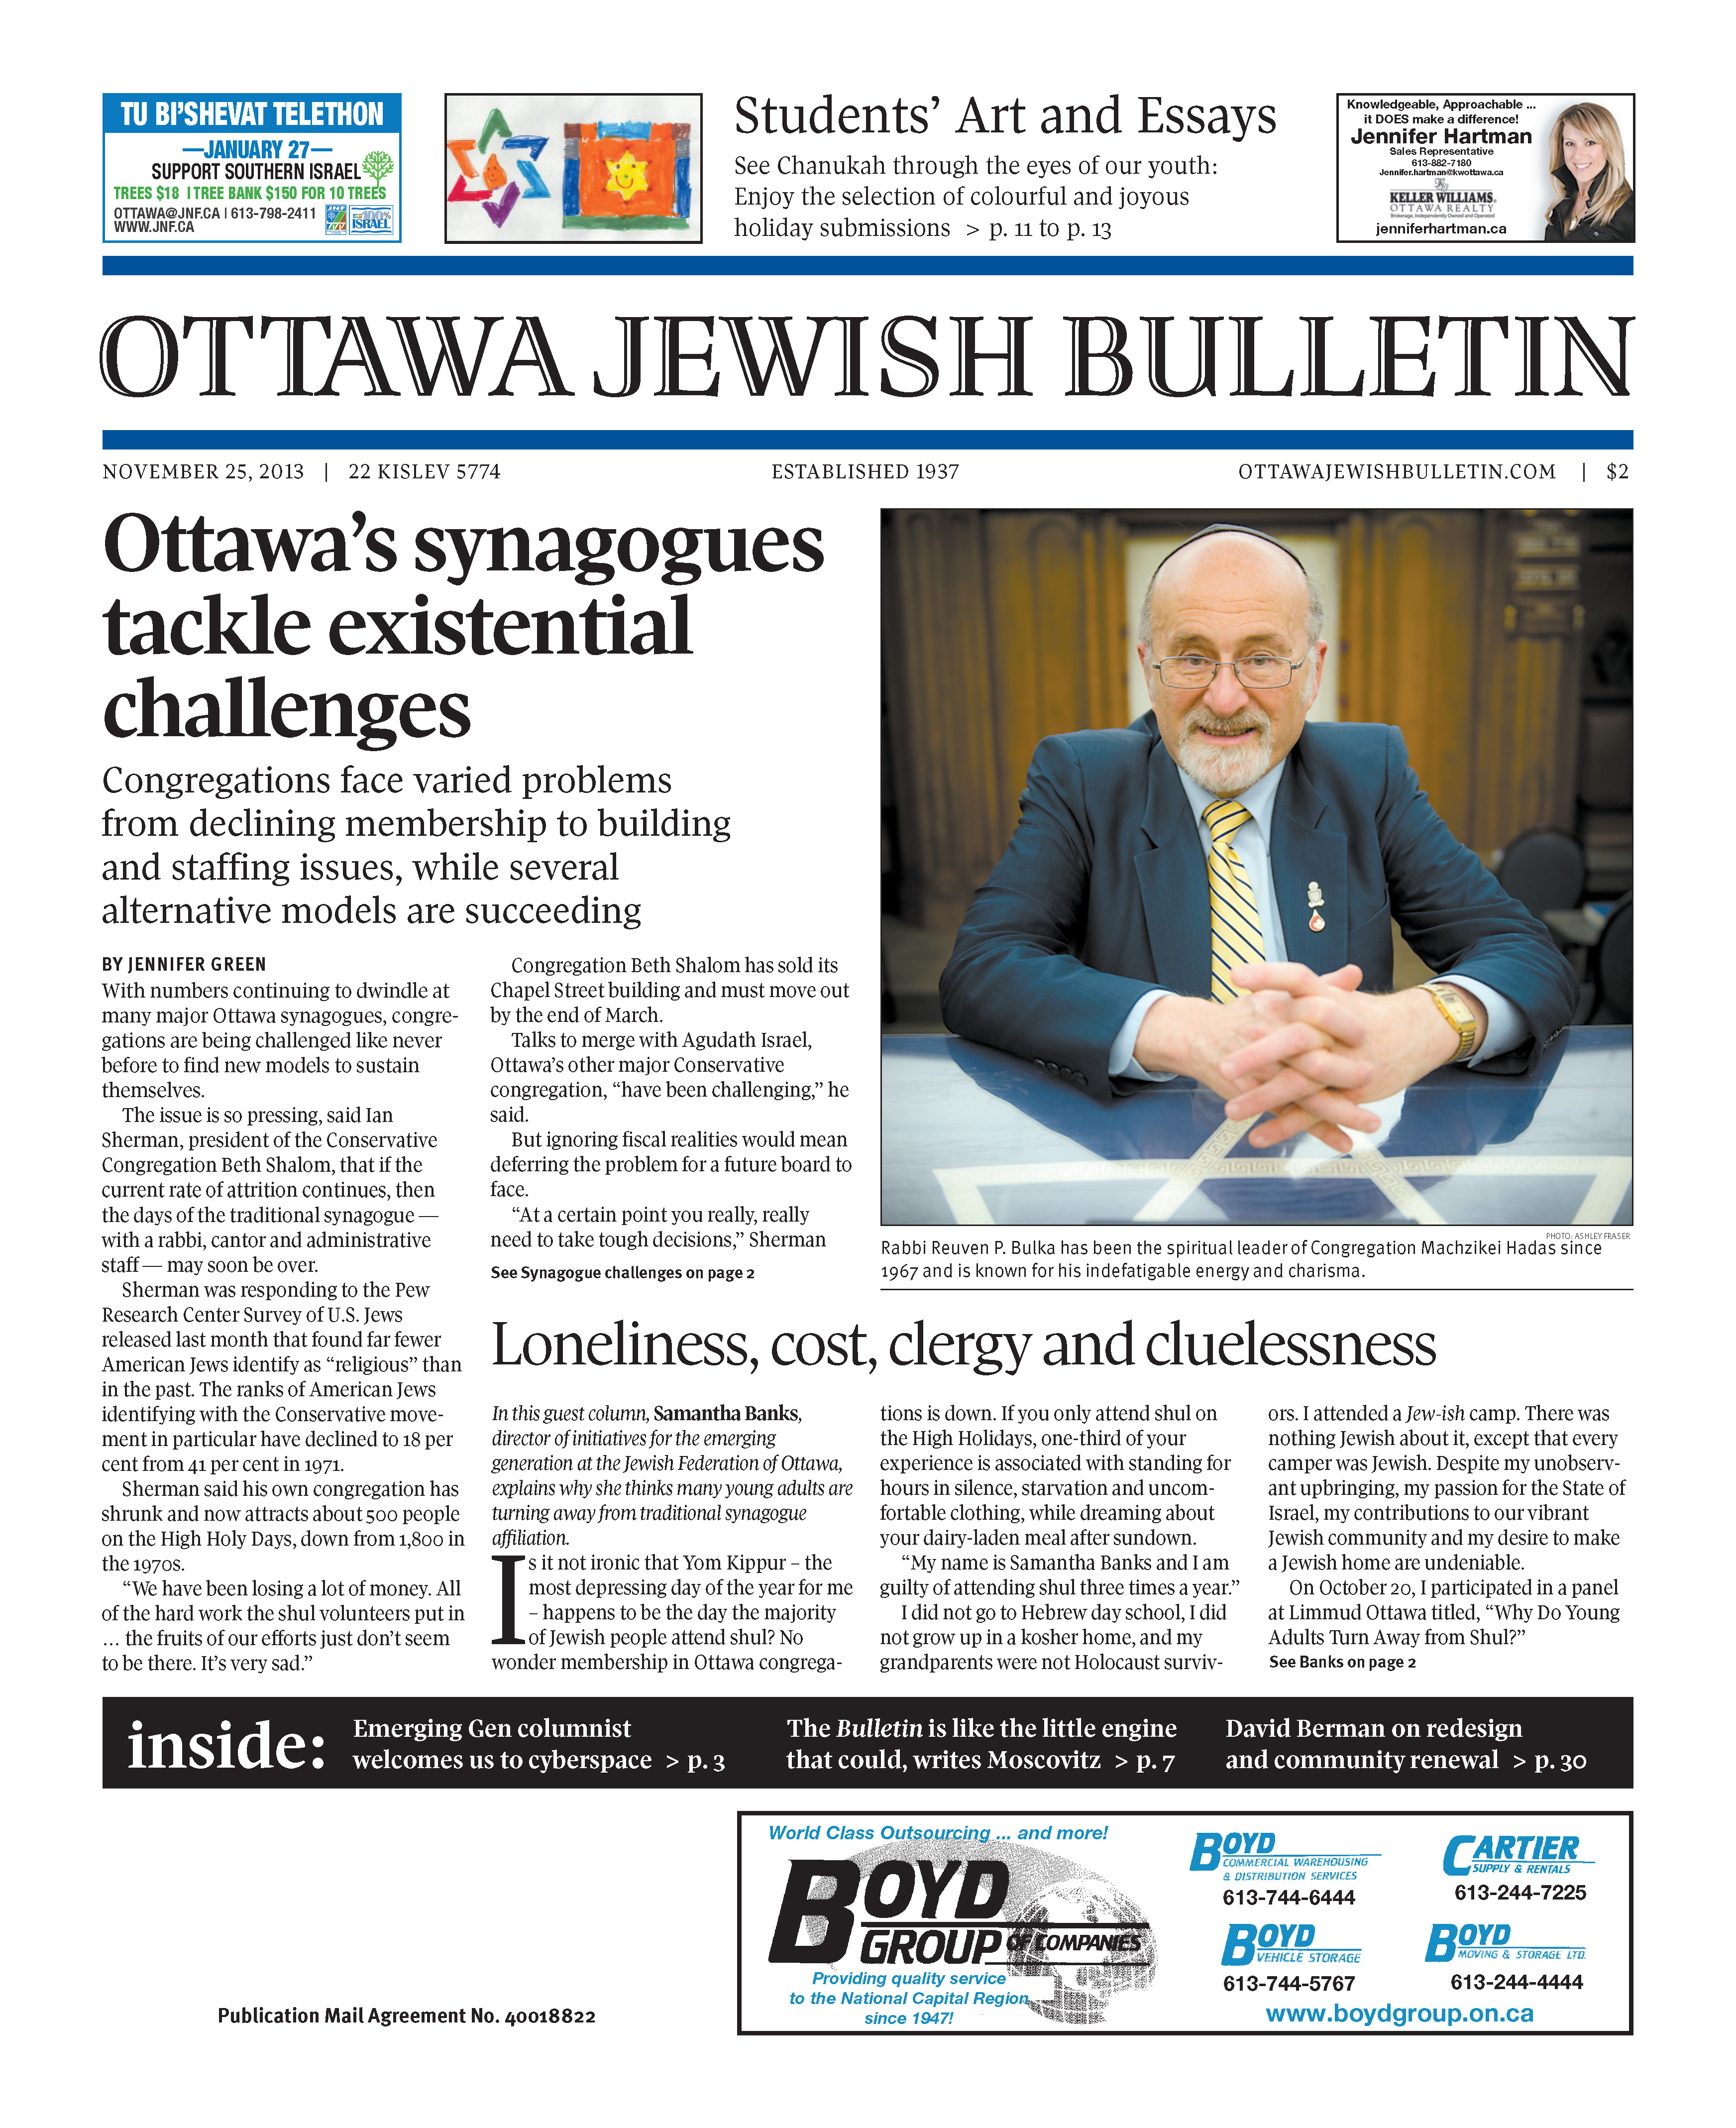 Image of a printed Ottawa Jewish Bulletin showing front page.